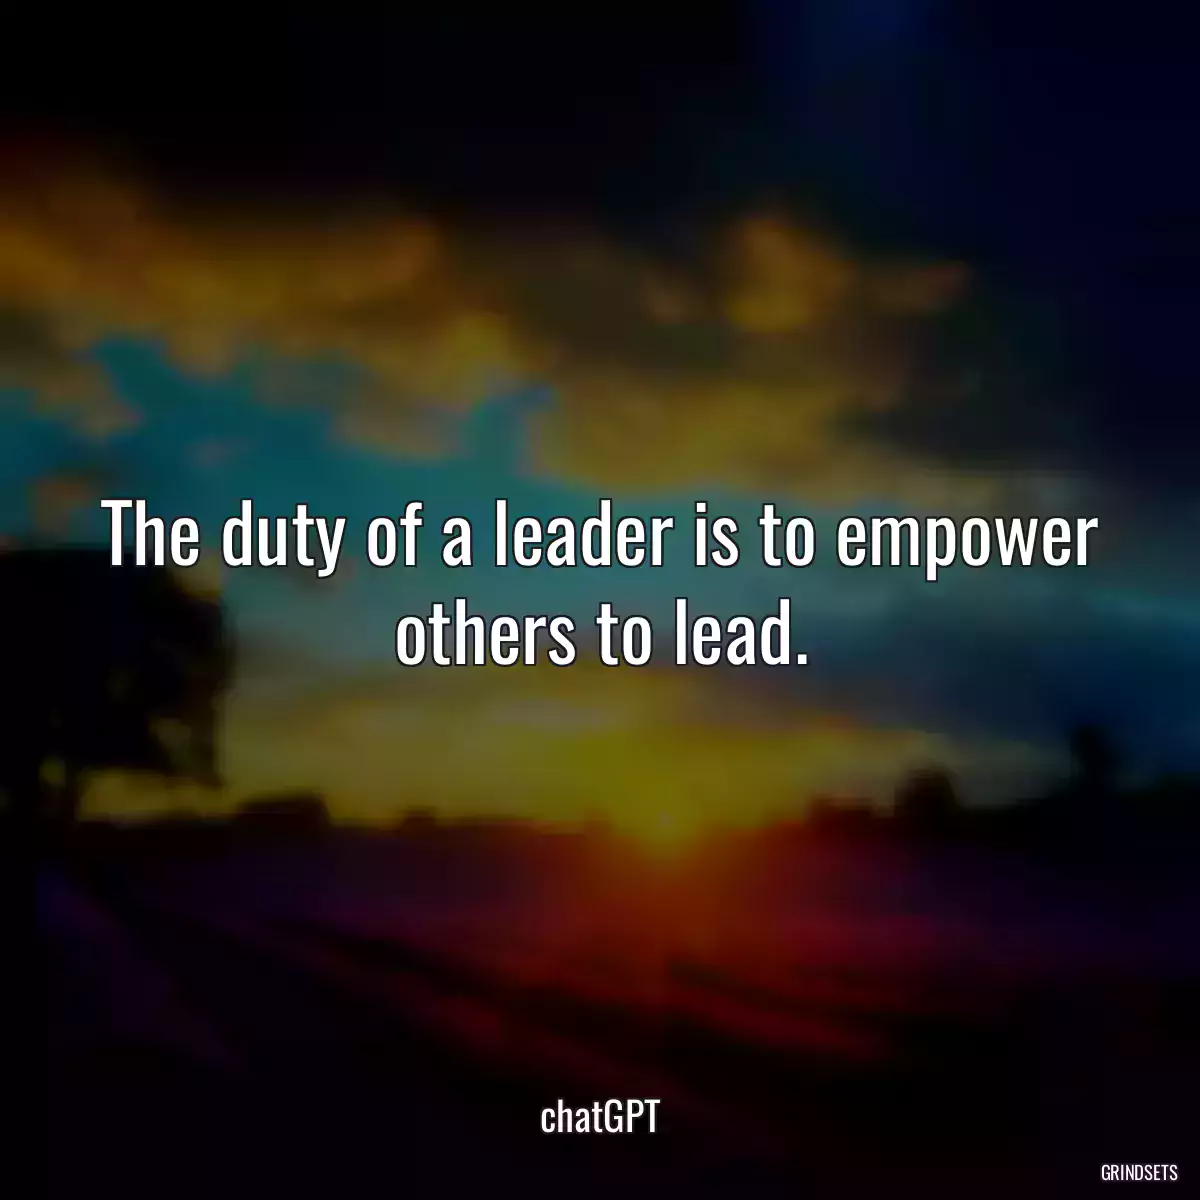 The duty of a leader is to empower others to lead.